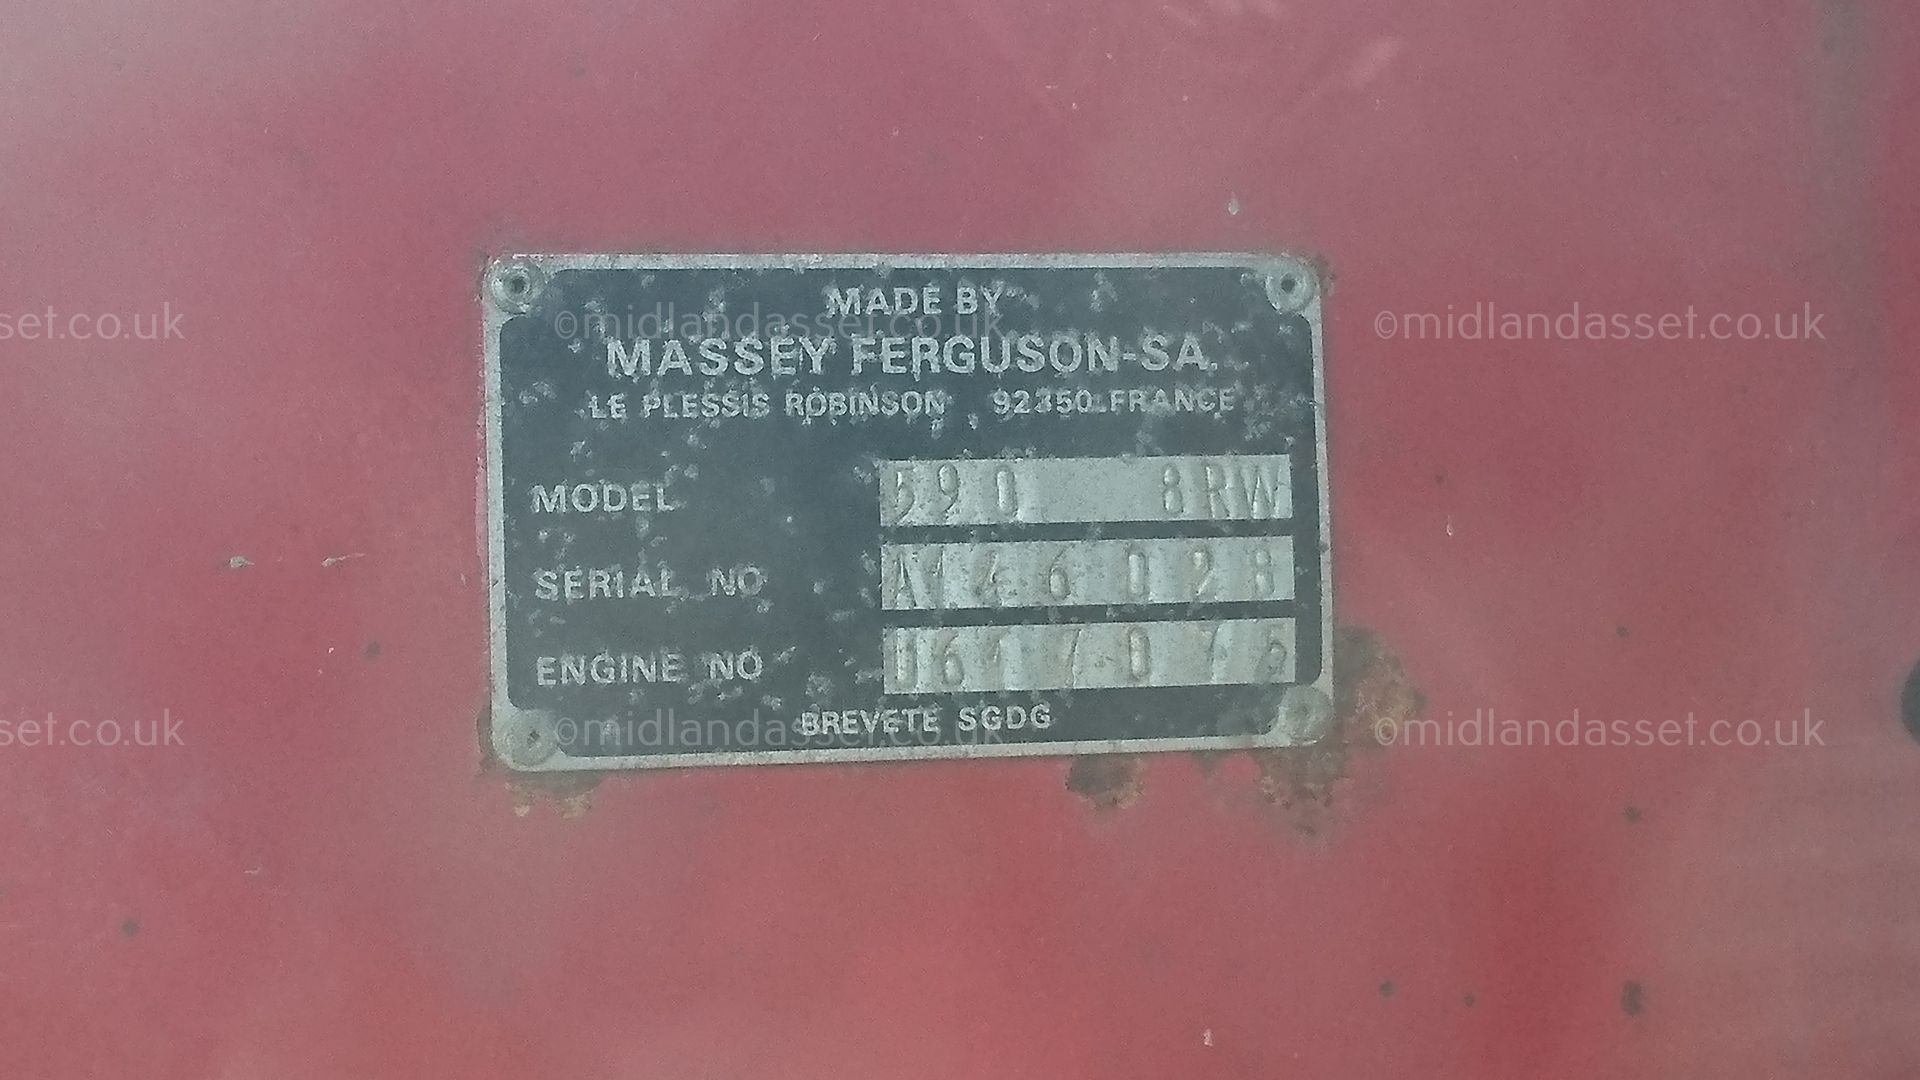 DS - MASSEY FERGUSON 590 4WD 204V TRACTOR   SHOWING 5,640 HOURS (UN-VERIFIED)   COLLECTION FROM - Image 8 of 10